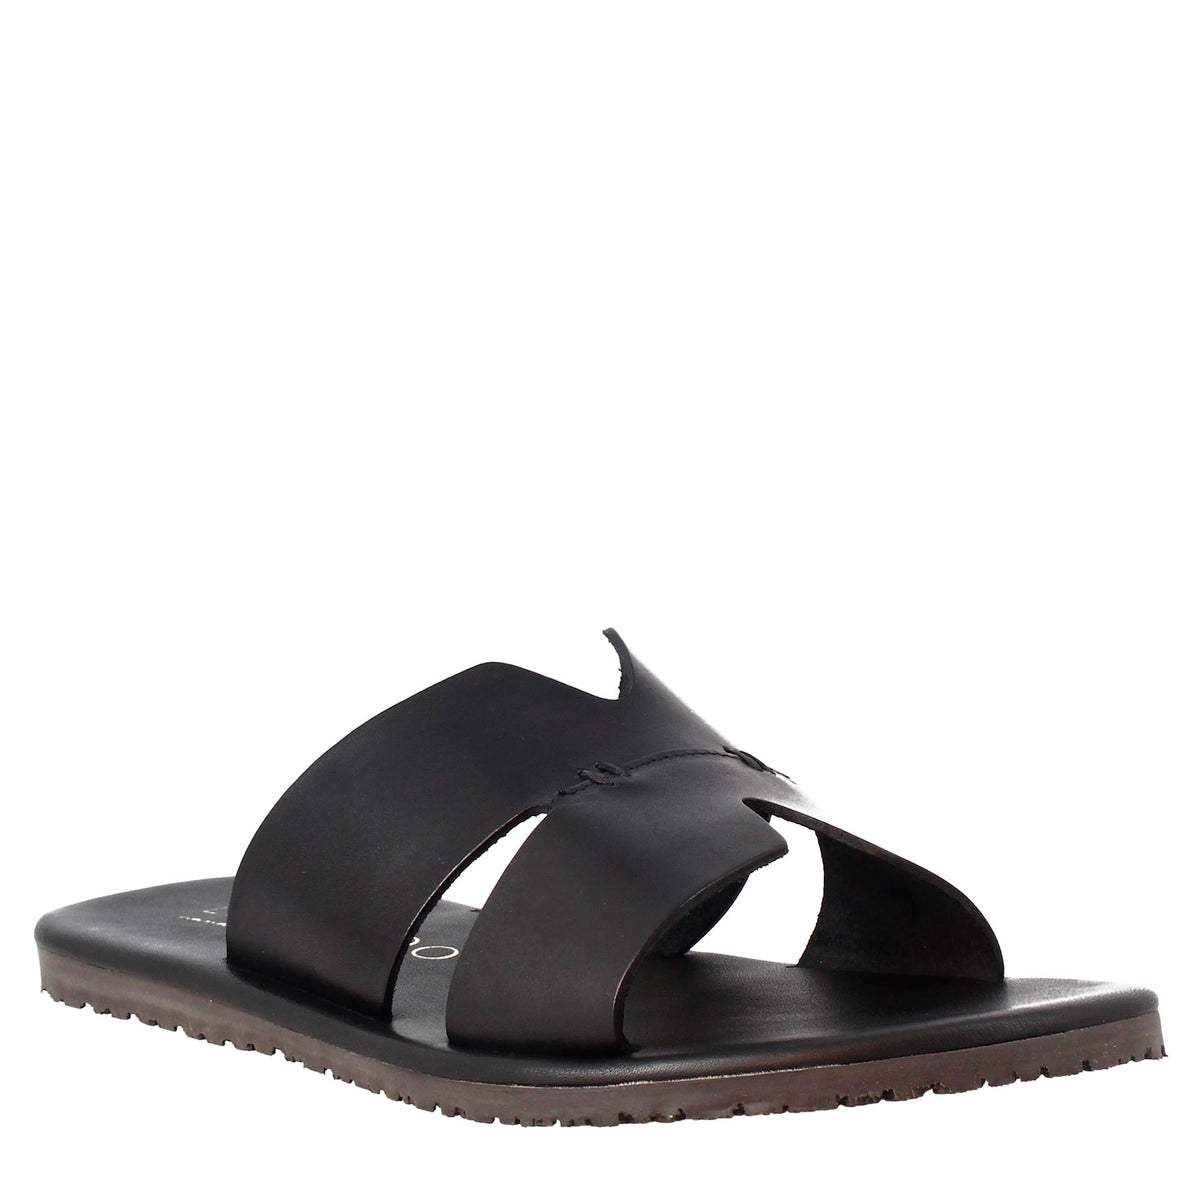 Men's H-shaped sandals in black leather